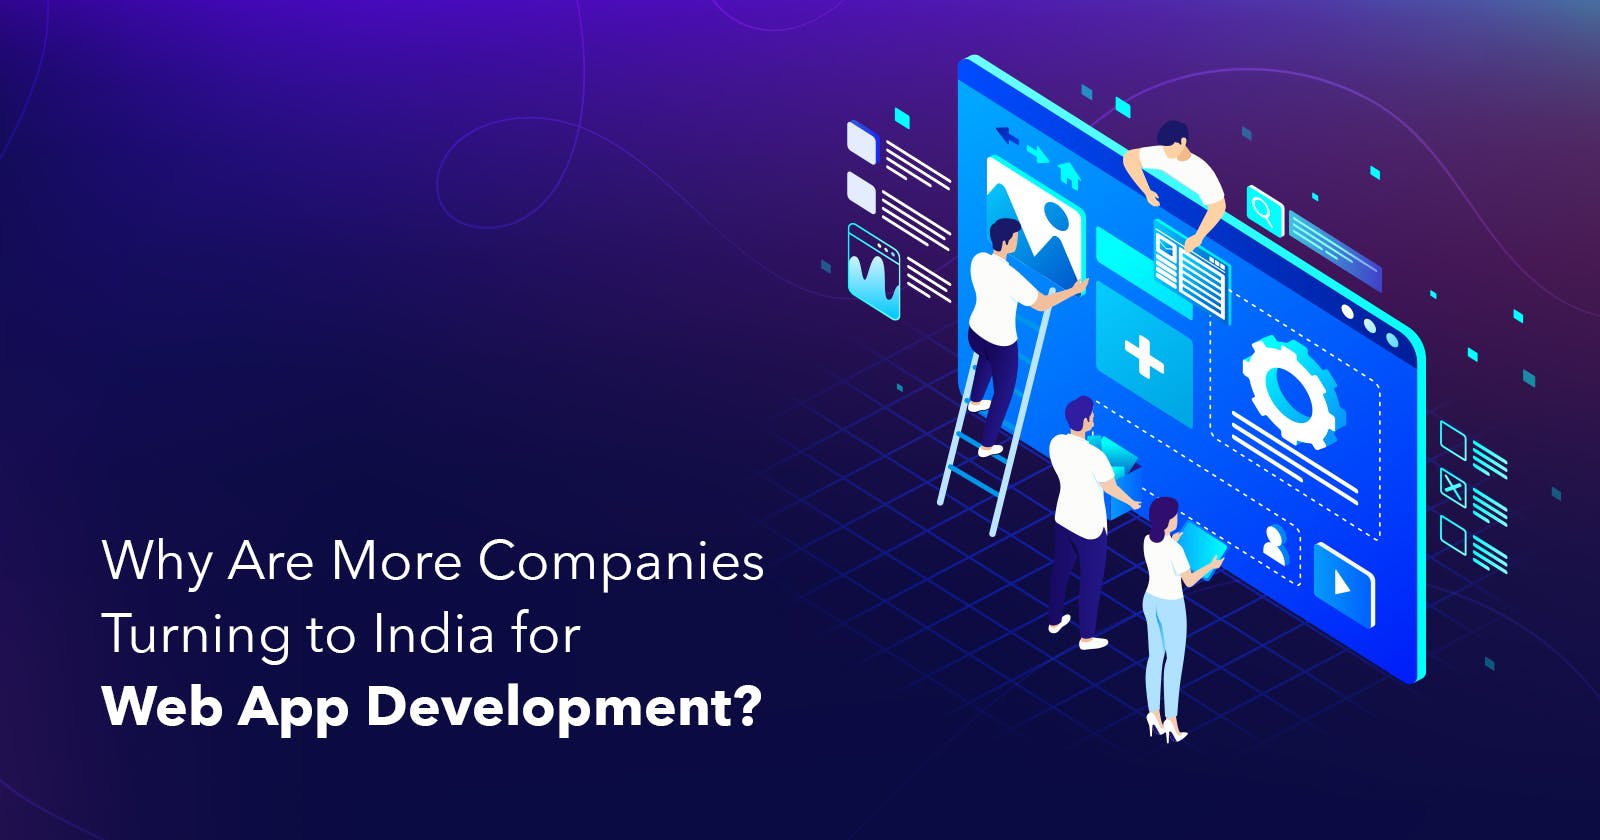 Why Are More Companies Turning to India for Web App Development?